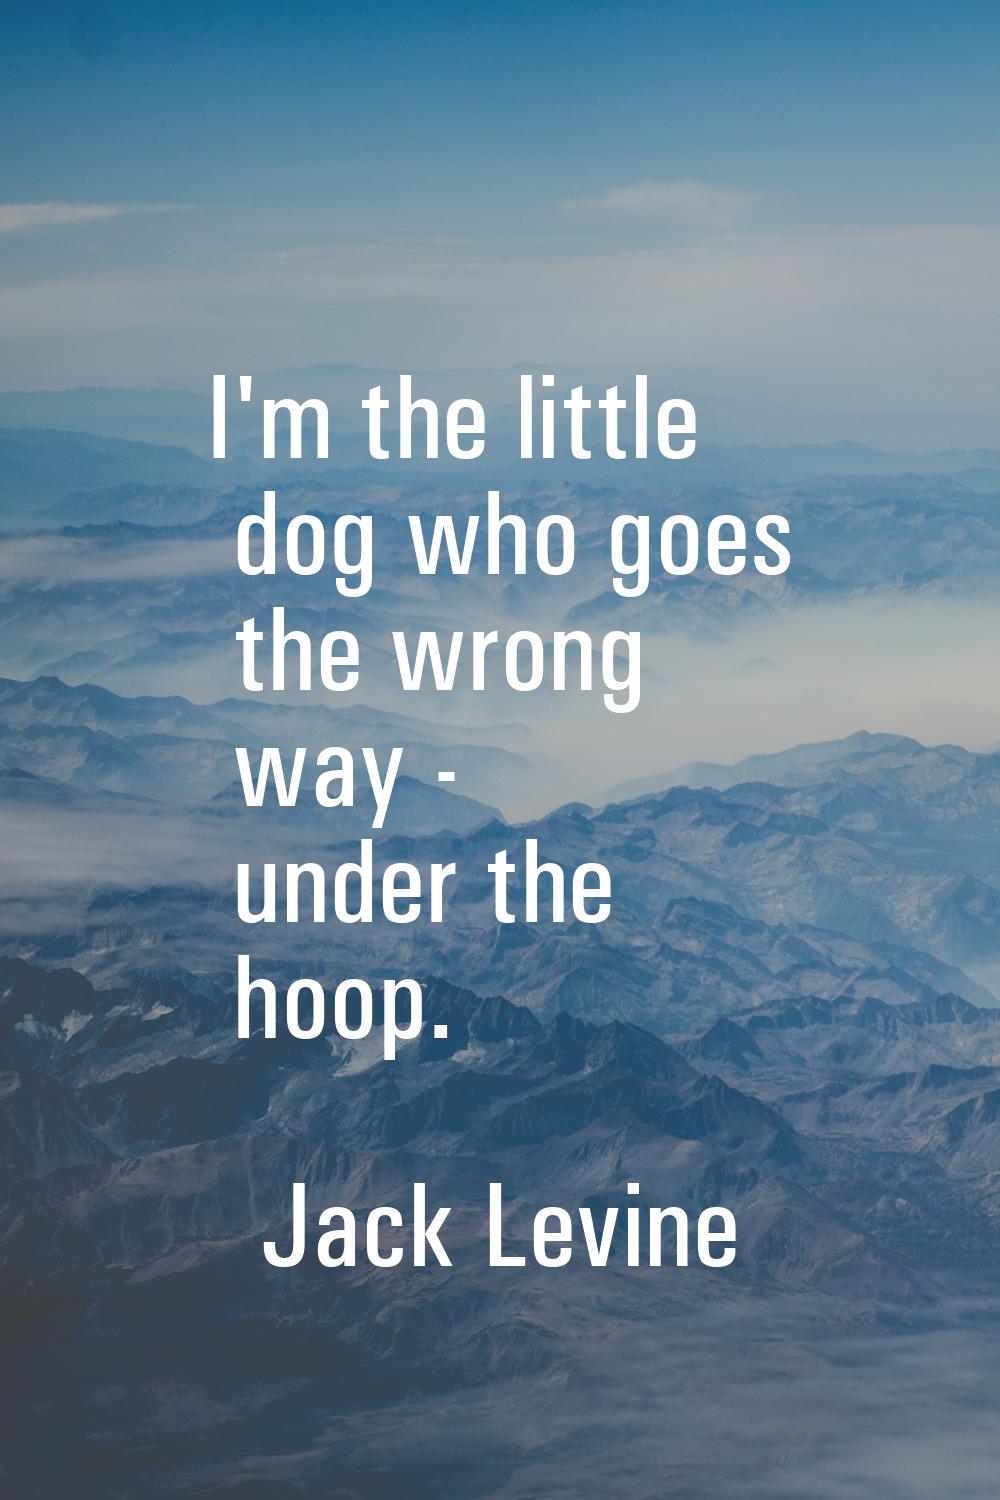 I'm the little dog who goes the wrong way - under the hoop.